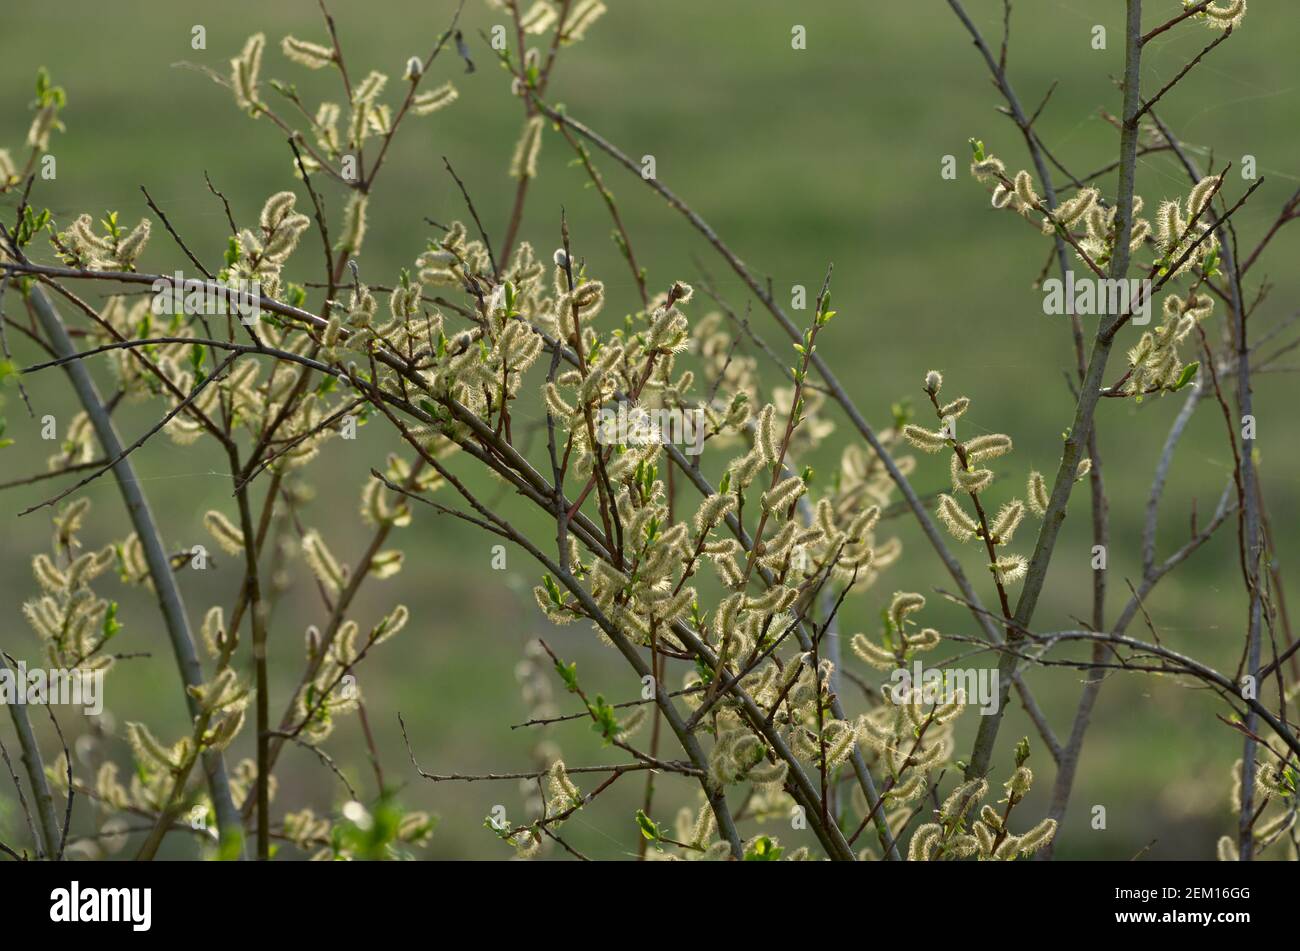 Fluffy willow catkins in the spring flowering period Stock Photo